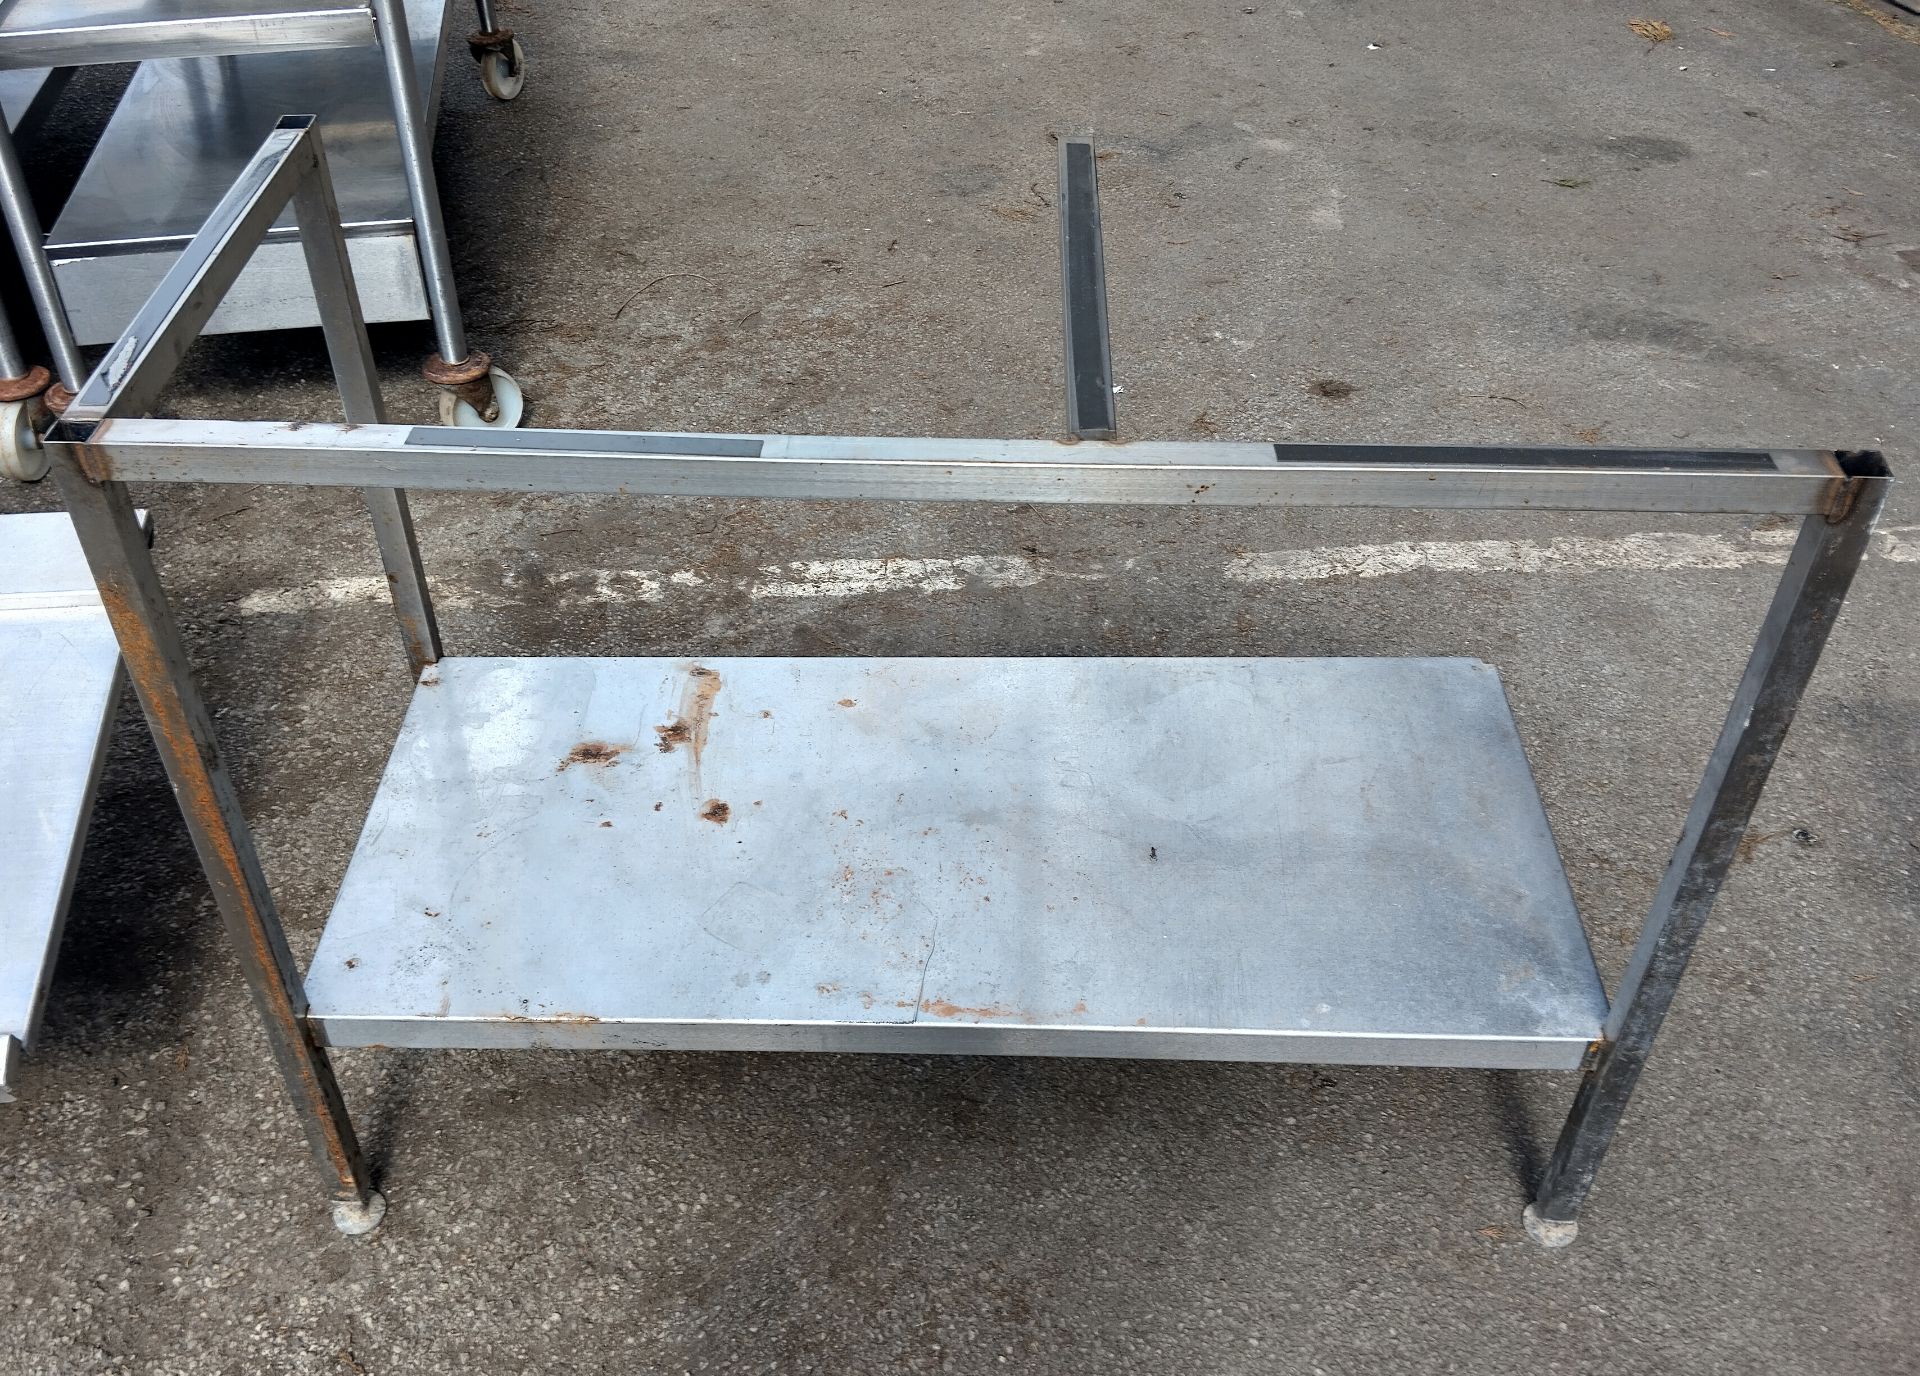 Stainless steel double sink - W 1550 x D 700 x H 1300mm - DAMAGED LEG - Image 2 of 2